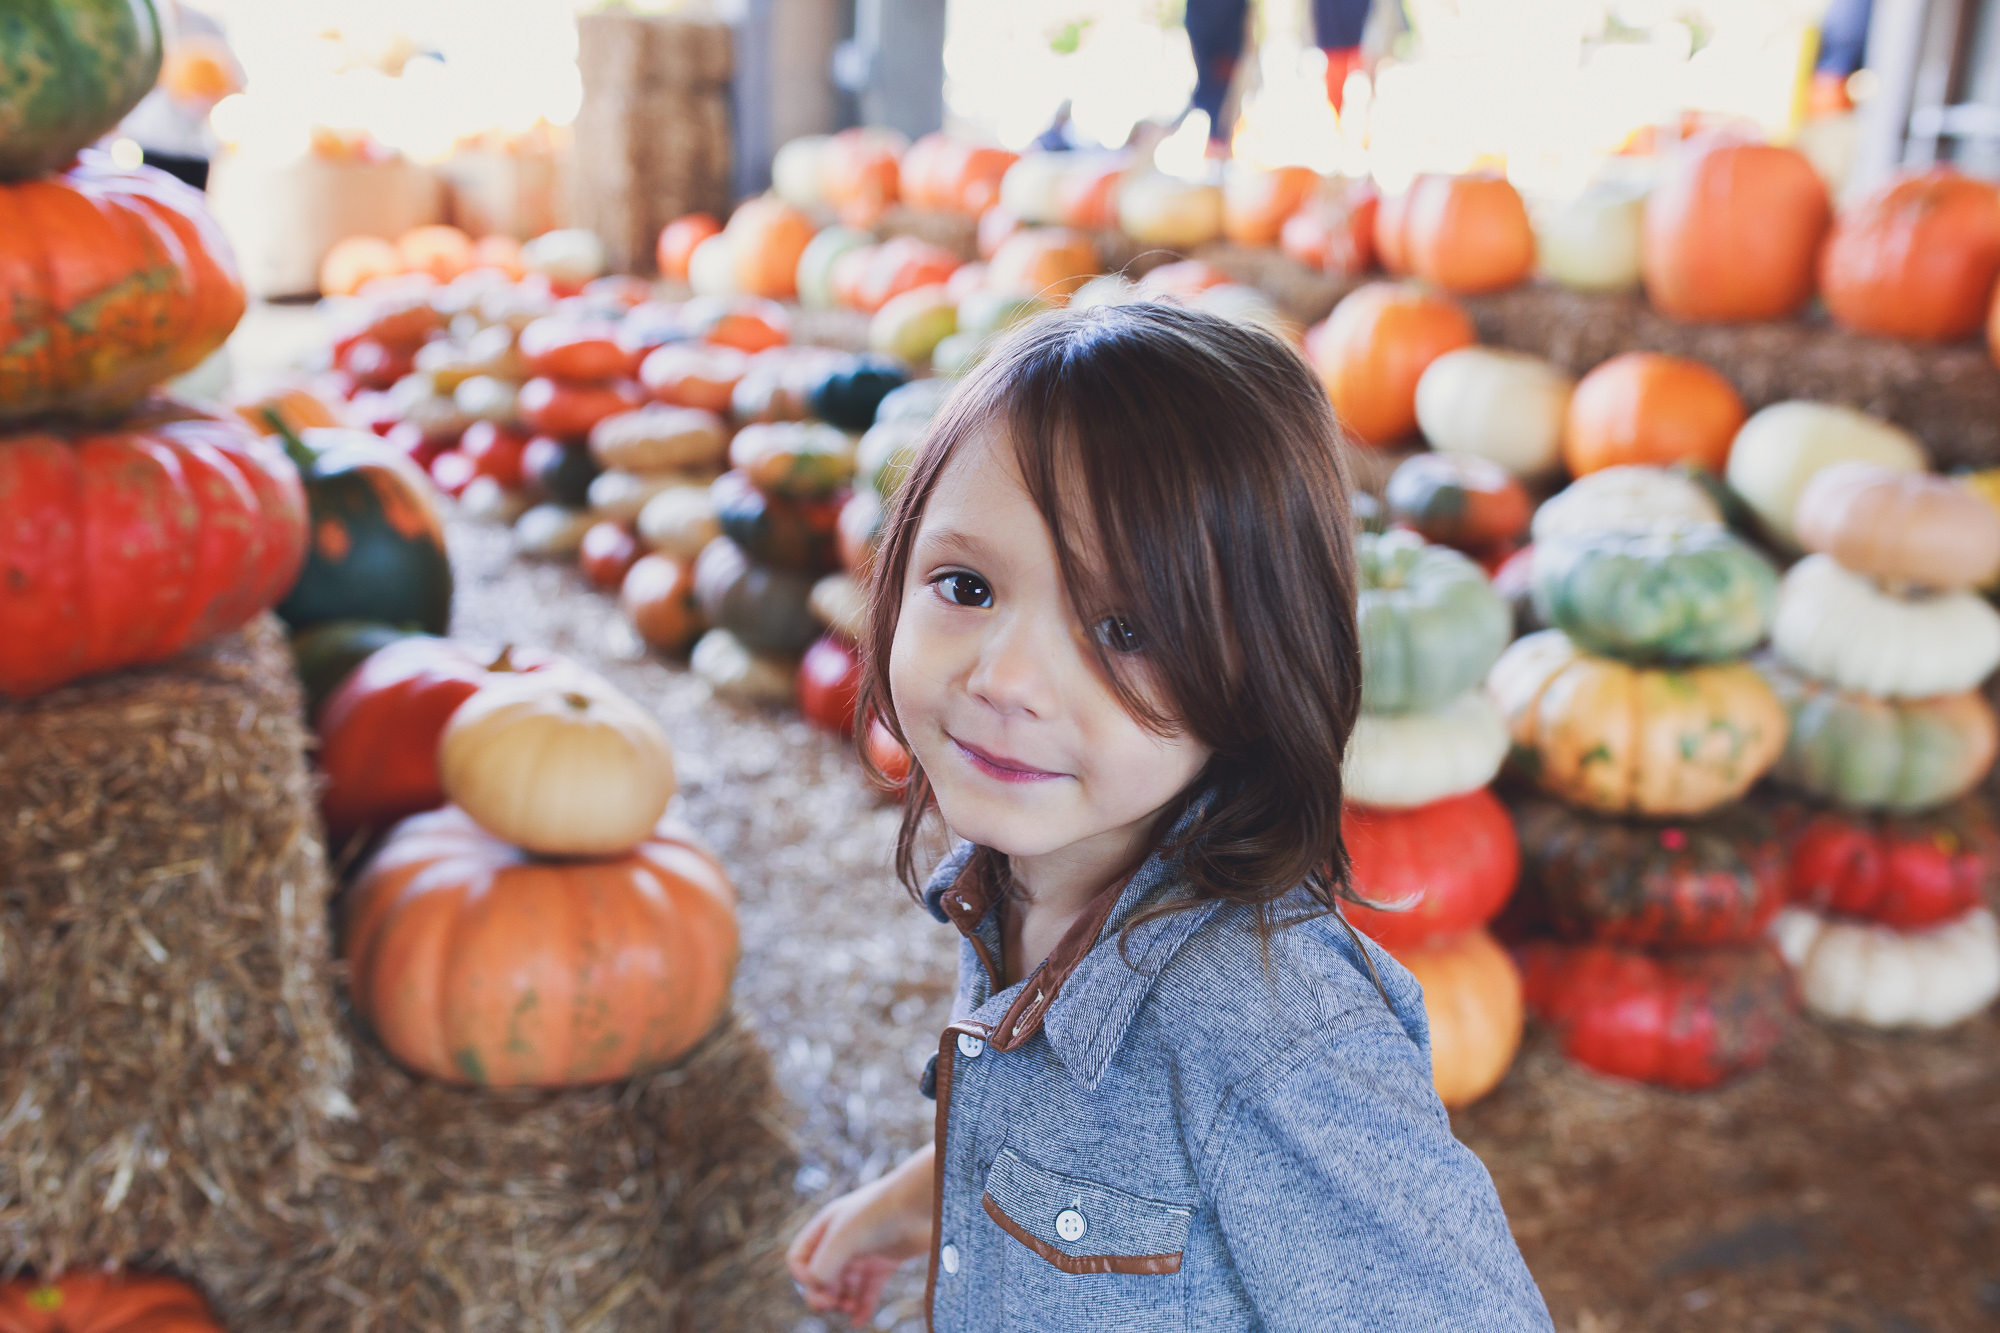 Lifestyle and fashion blogger Jessica Linn from Linn Style wearing a navy blue and white horizontal striped maternity dress from Target and a denim jacket. Shopping for pumpkins at the NC State Farmers Market for fall. October